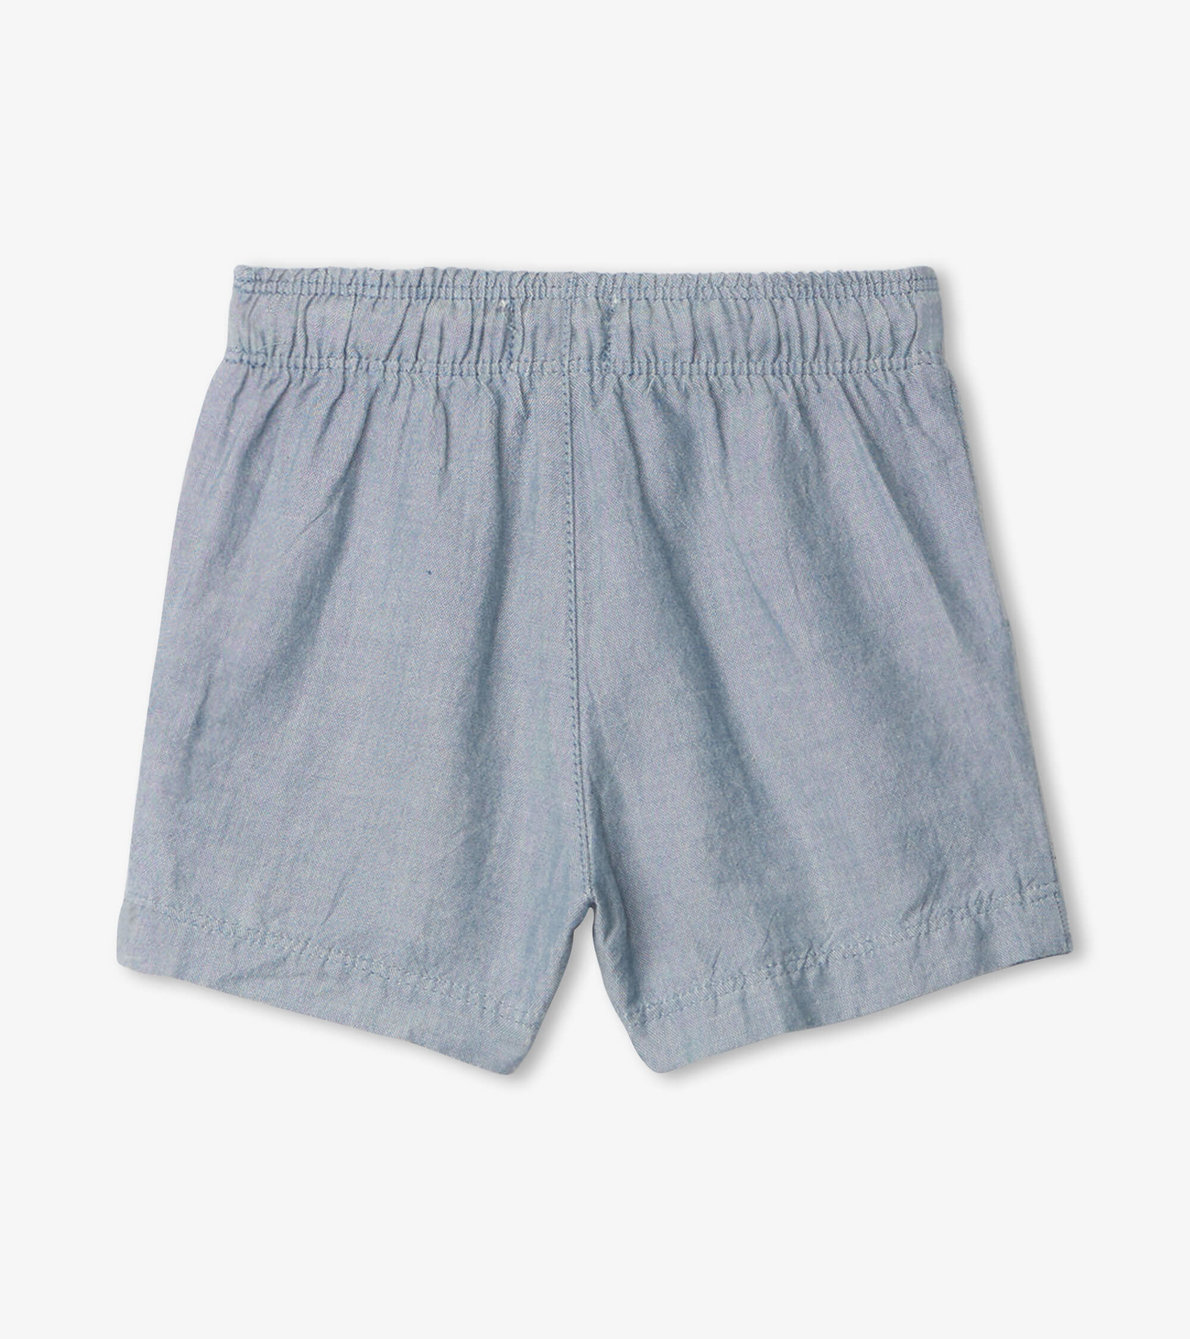 View larger image of Chambray Baby Woven Shorts